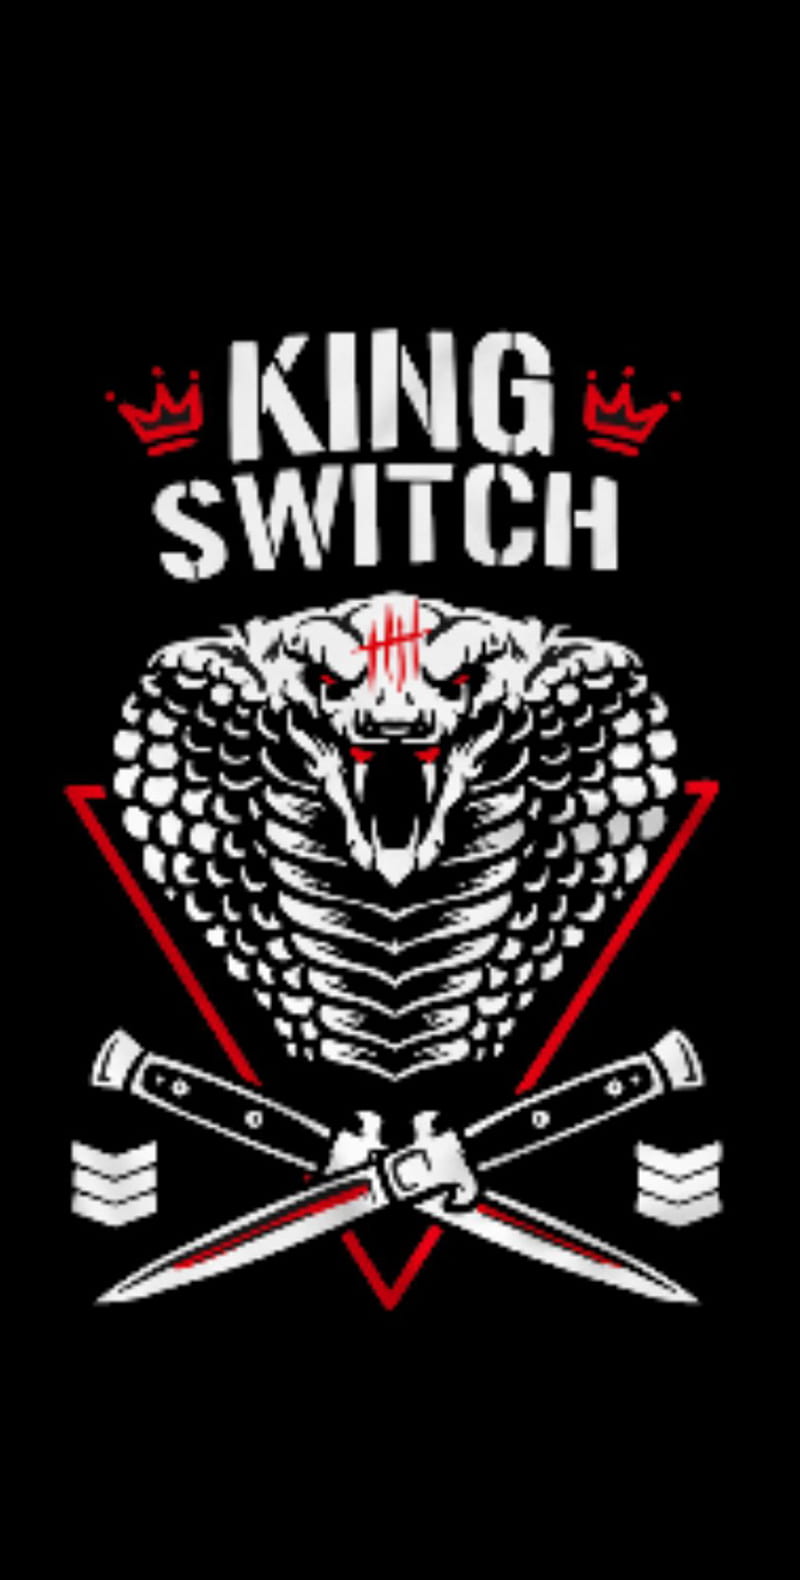 King switch, bullet club, switchblade, HD phone wallpaper